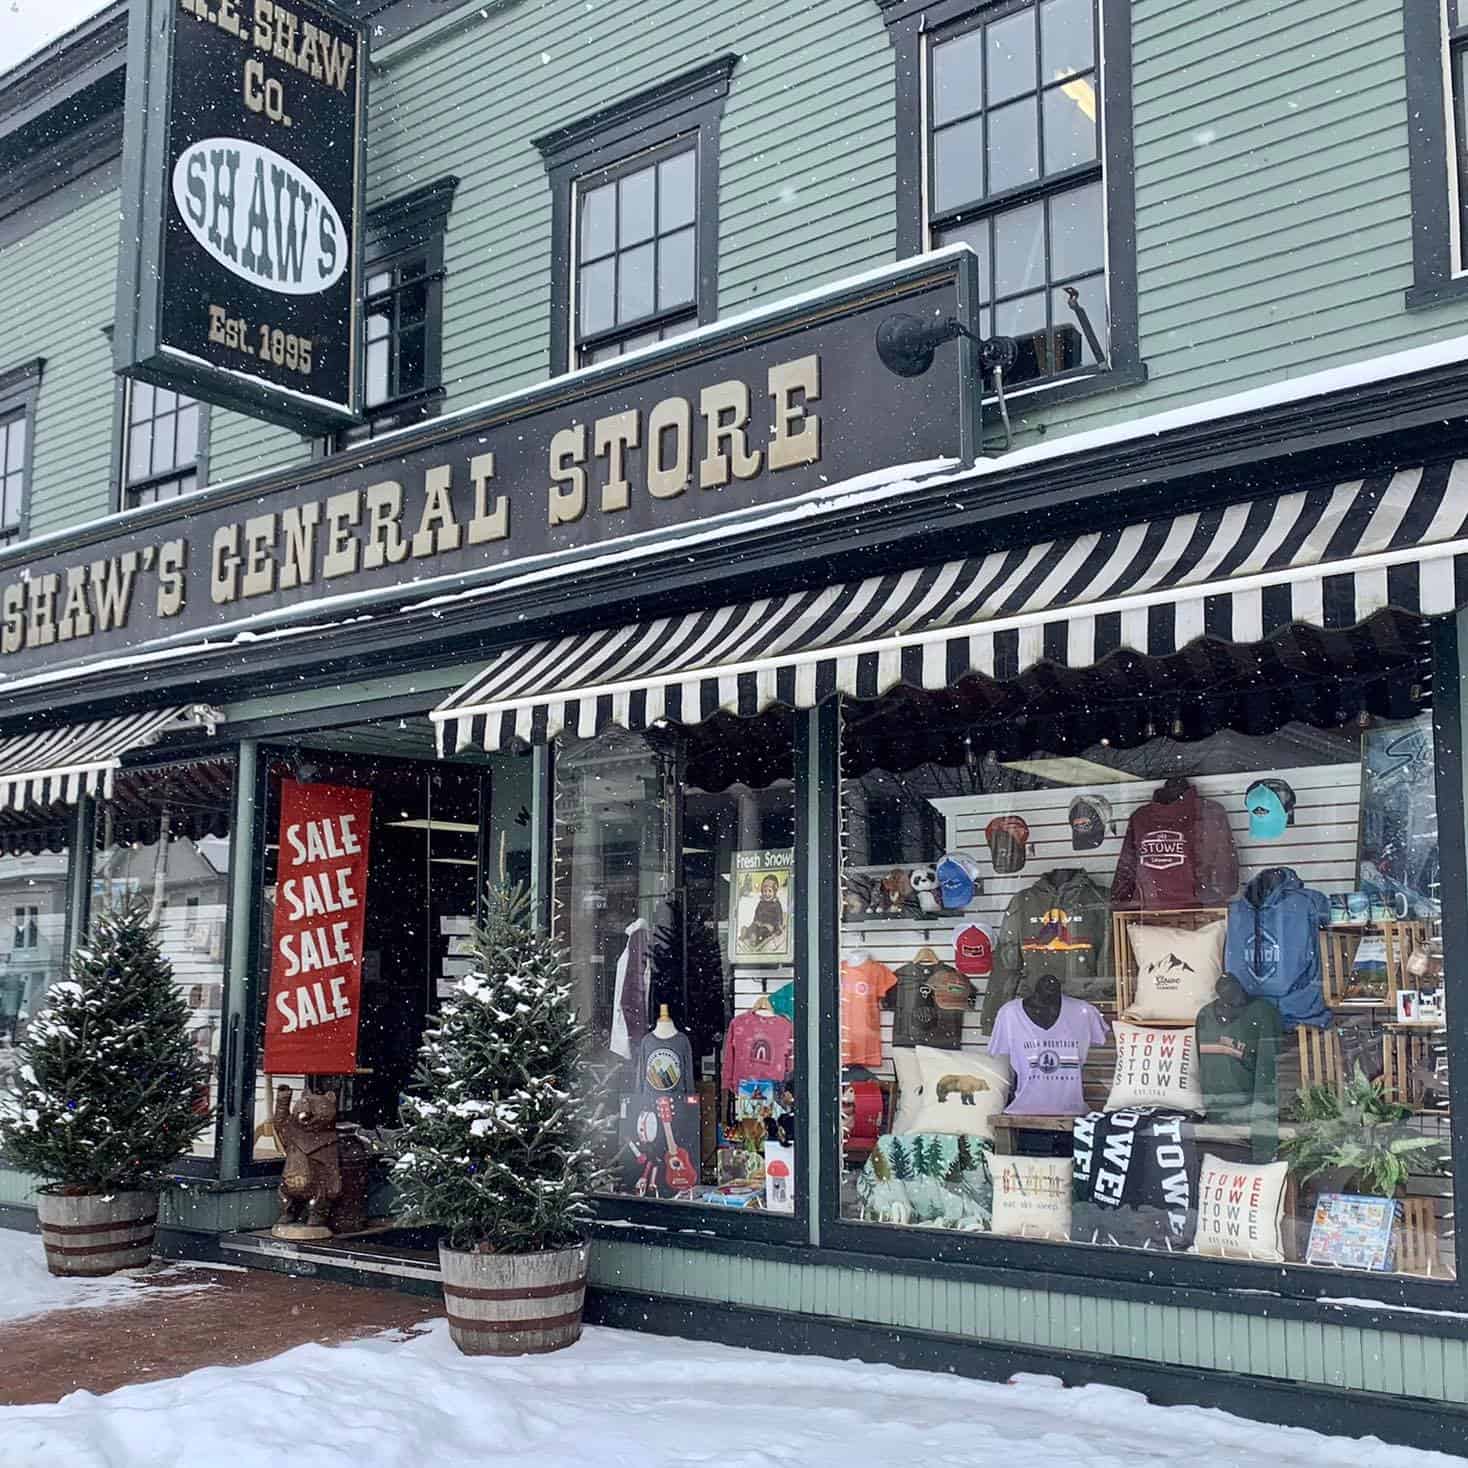 Shaw's General Store - Winter Exterior